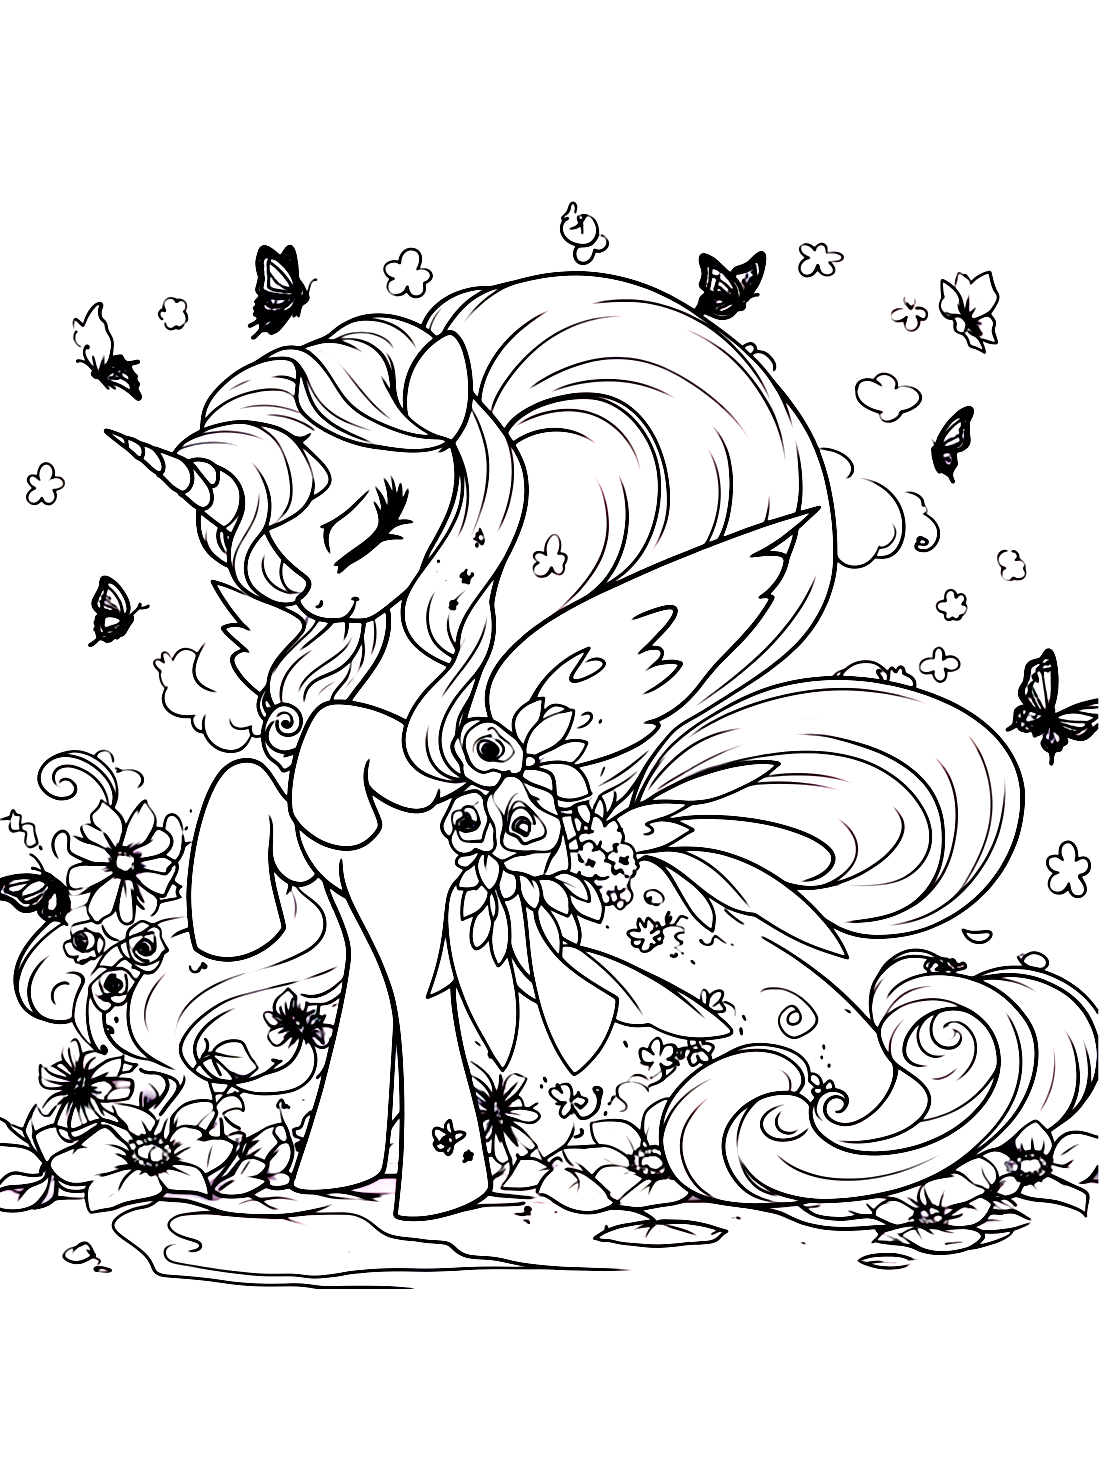 Coloring Pages of Fluttershy